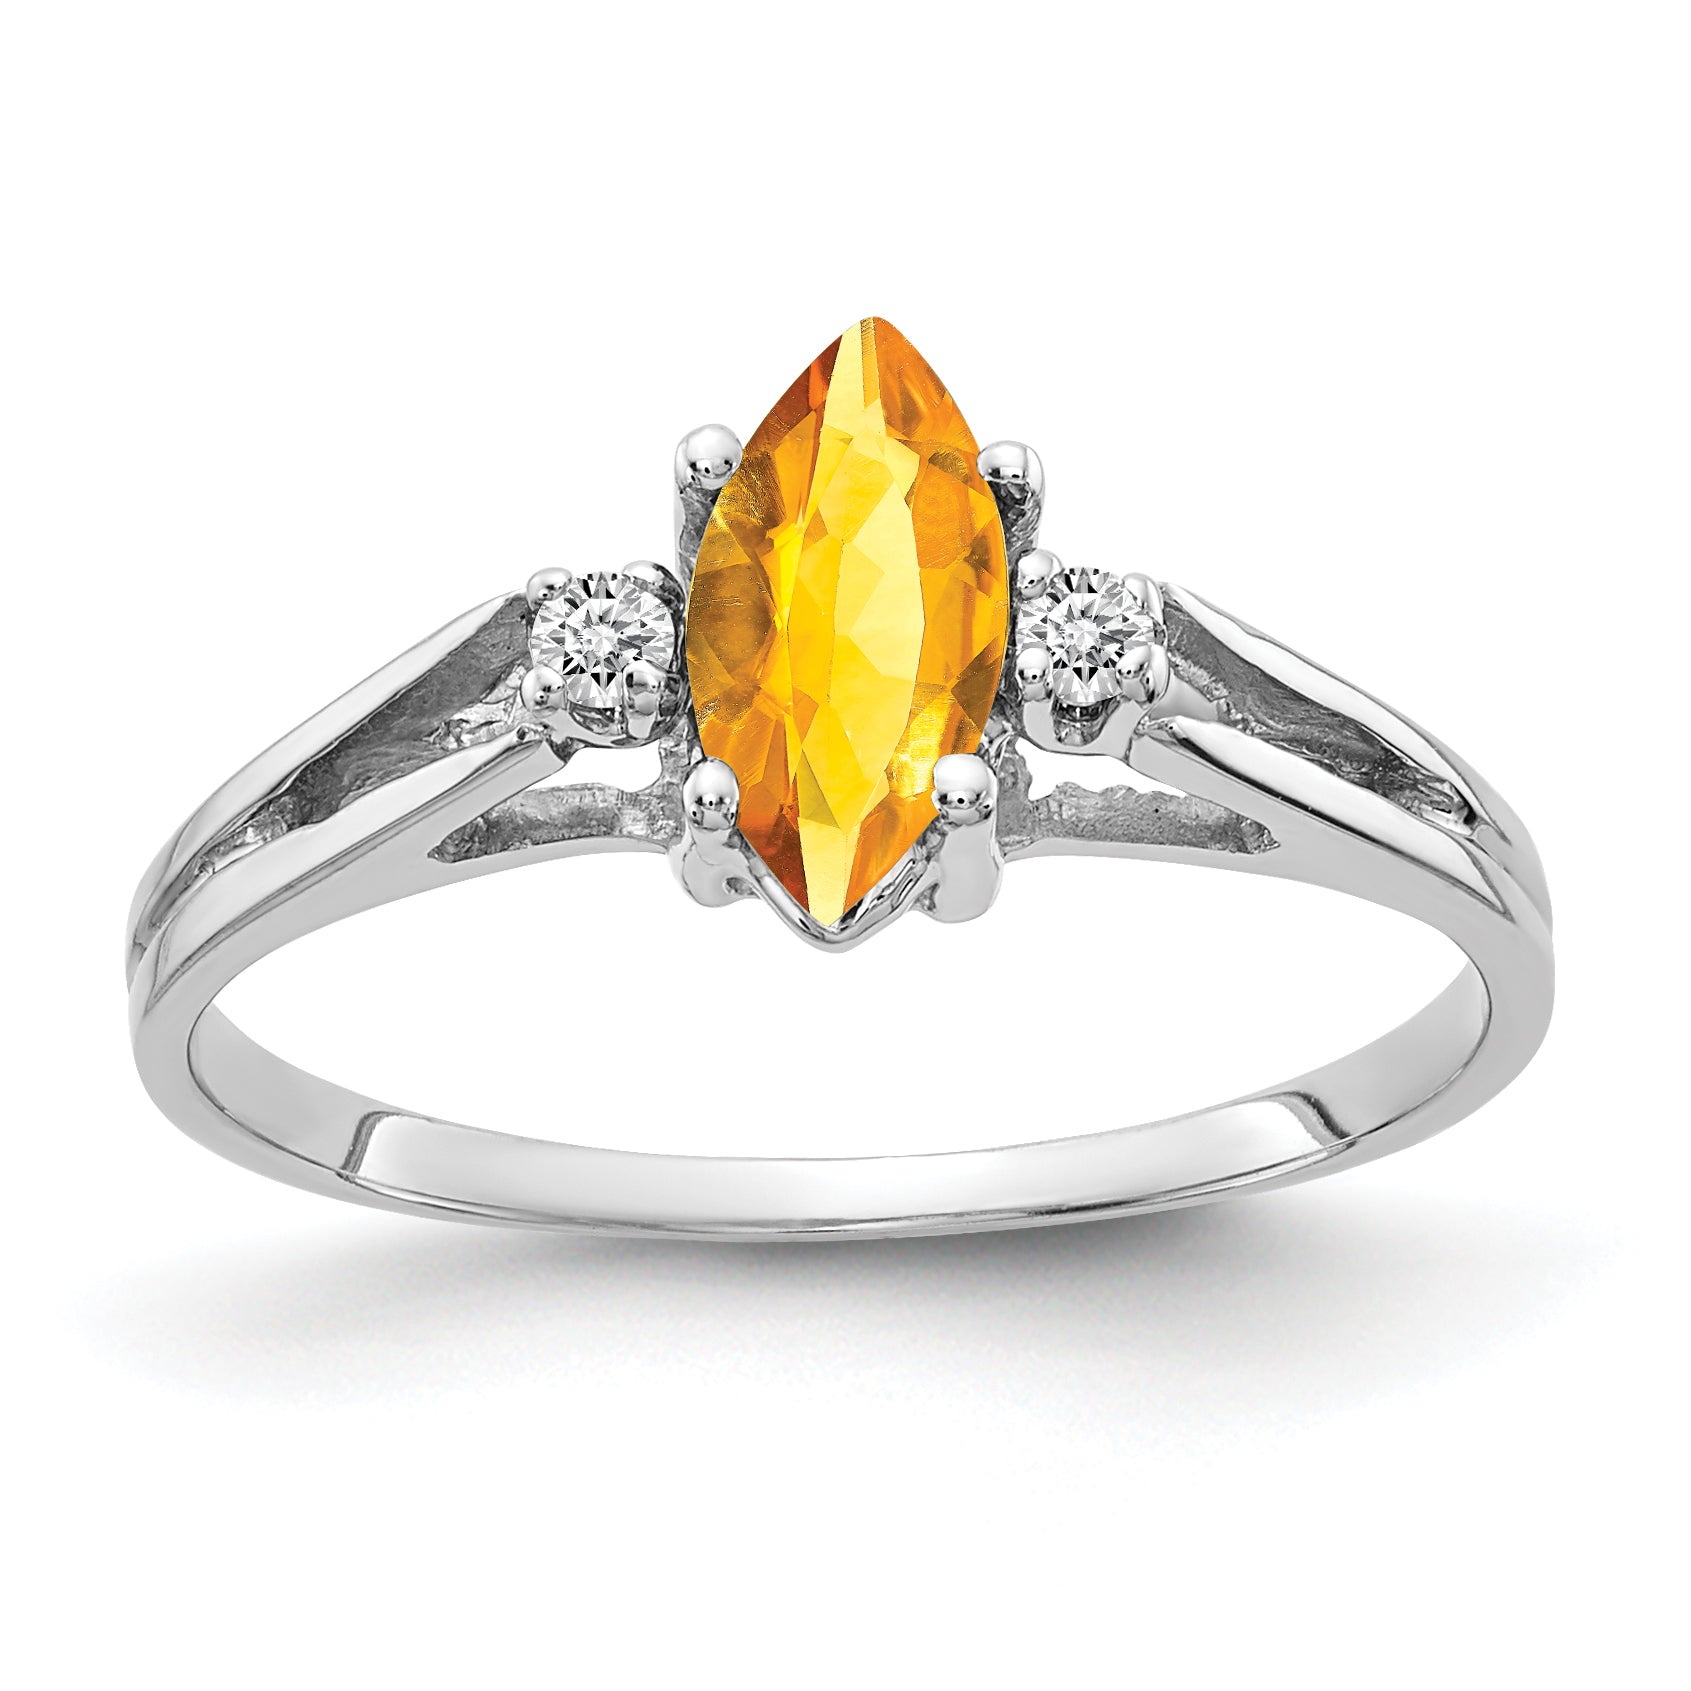 Image of ID 1 14k White Gold 8x4mm Marquise Citrine A Diamond ring